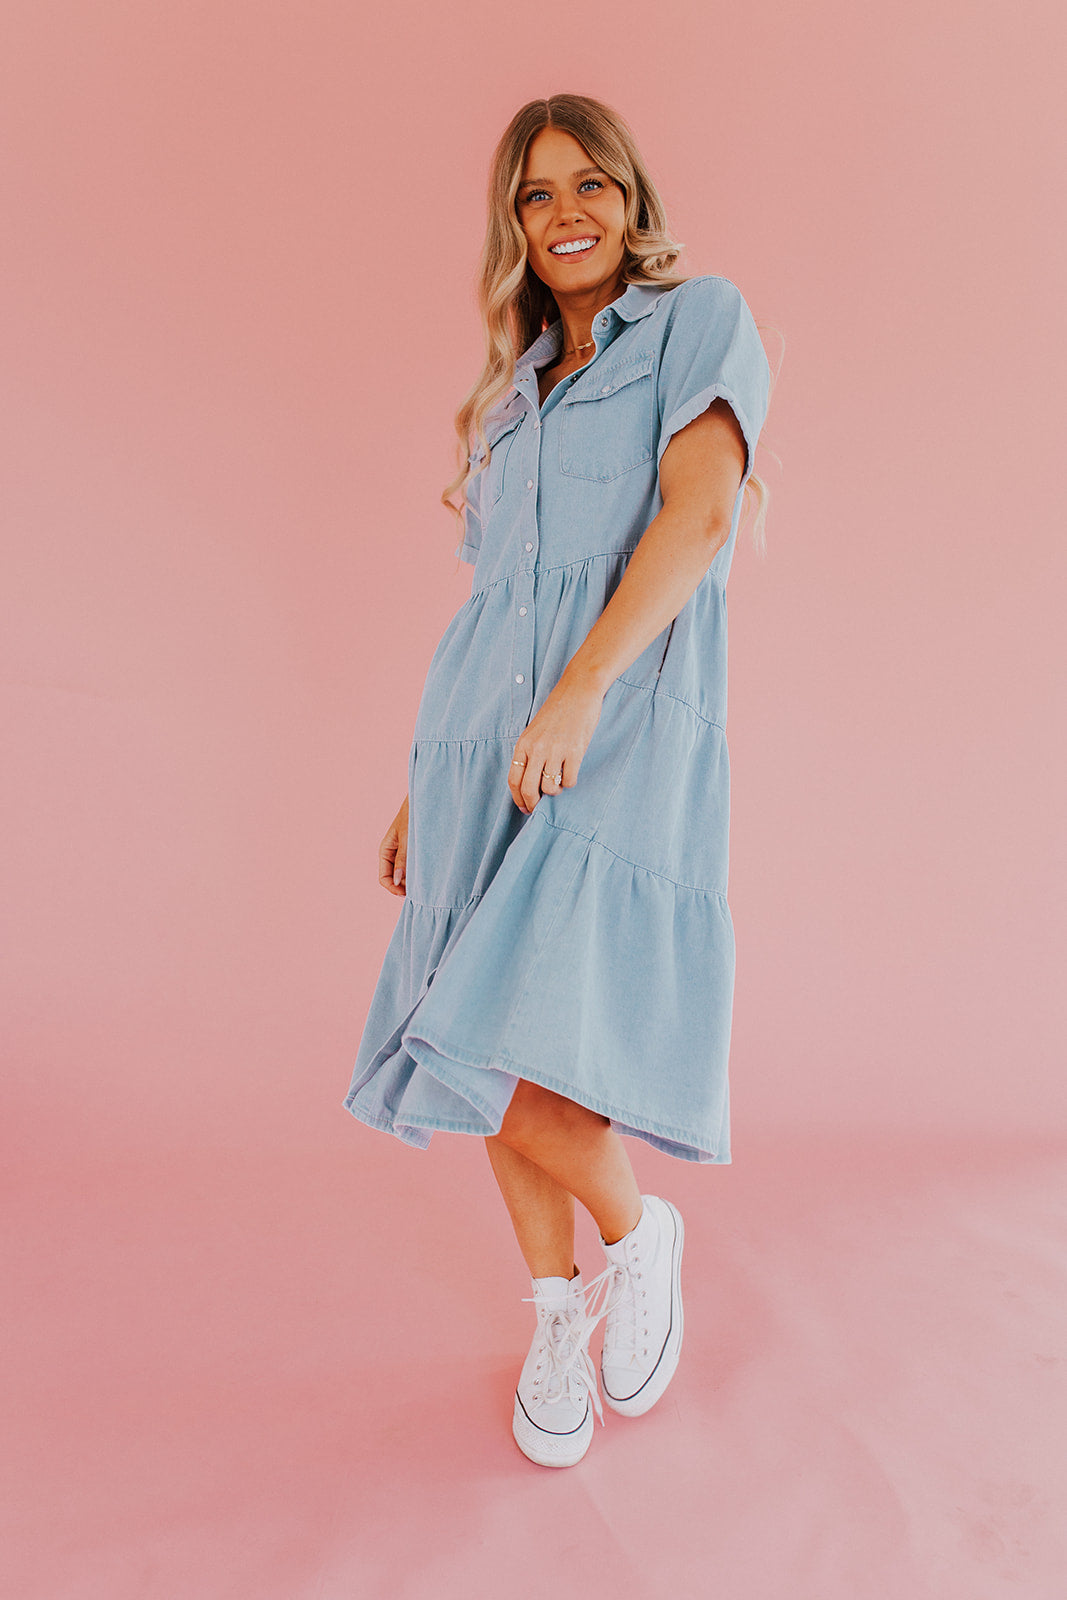 Details more than 218 denim midi dress with sleeves